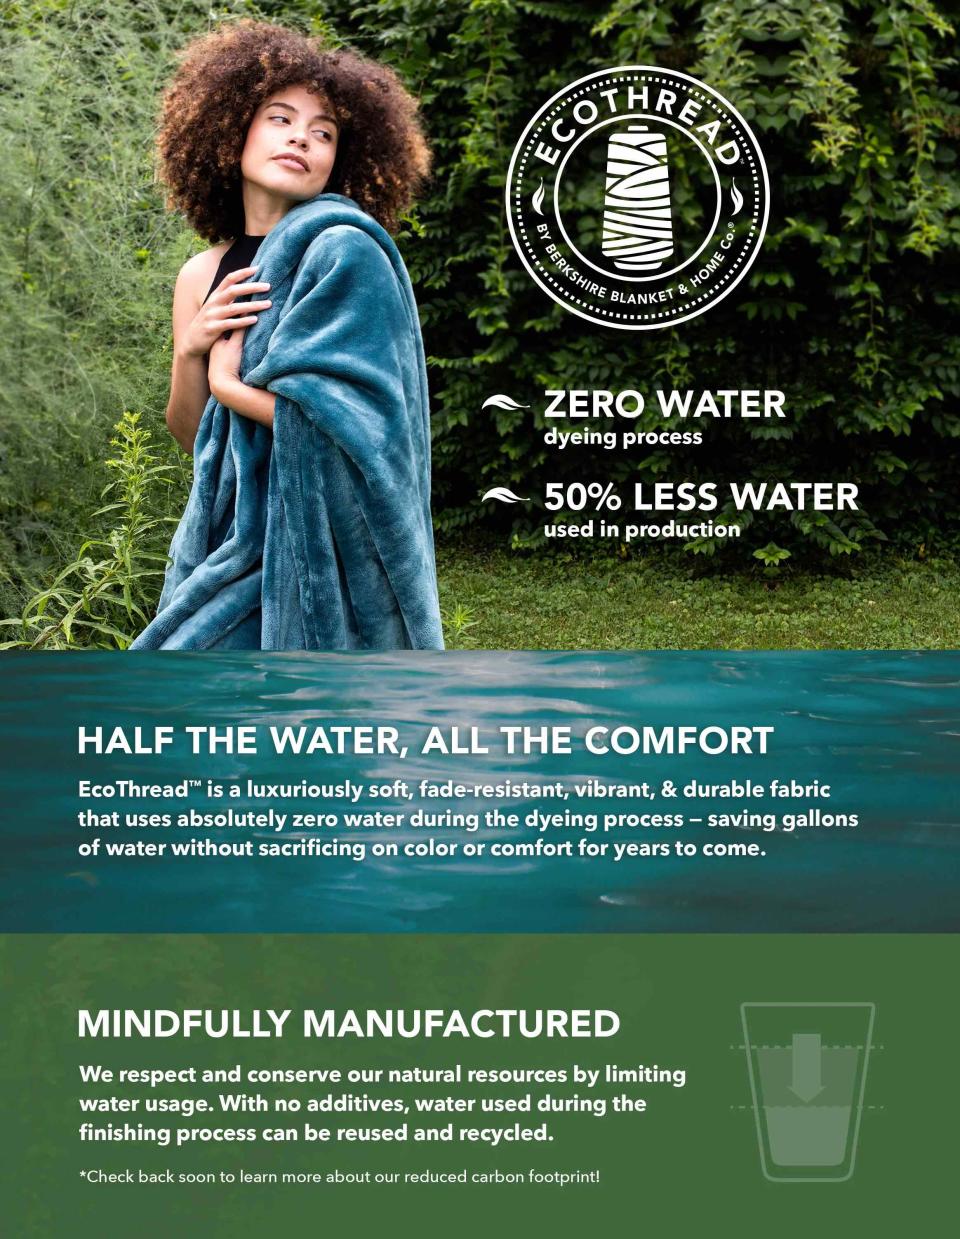 The EcoThread blanket series by Berkshire Blanket & Home Company makes sustainability claims that have been called into question in a class action greenwashing lawsuit filed last Friday.